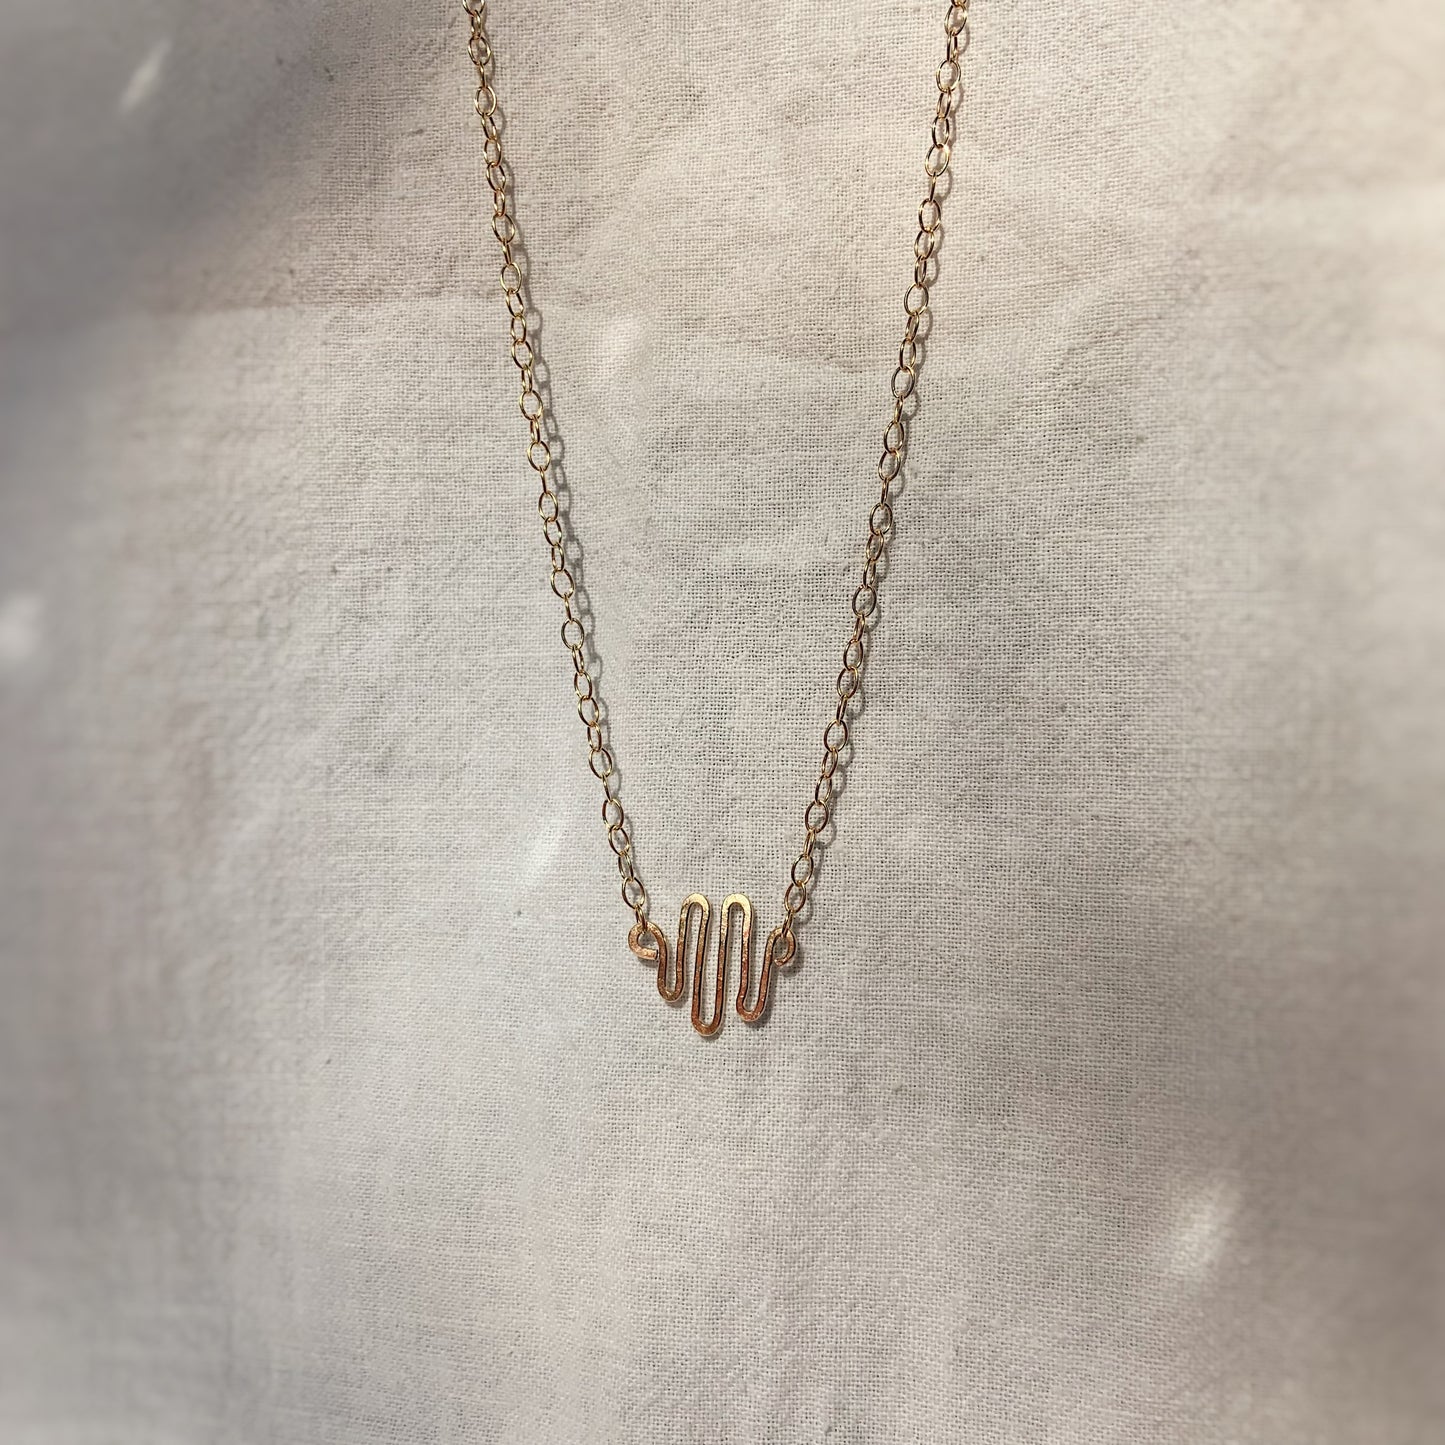 currents necklace